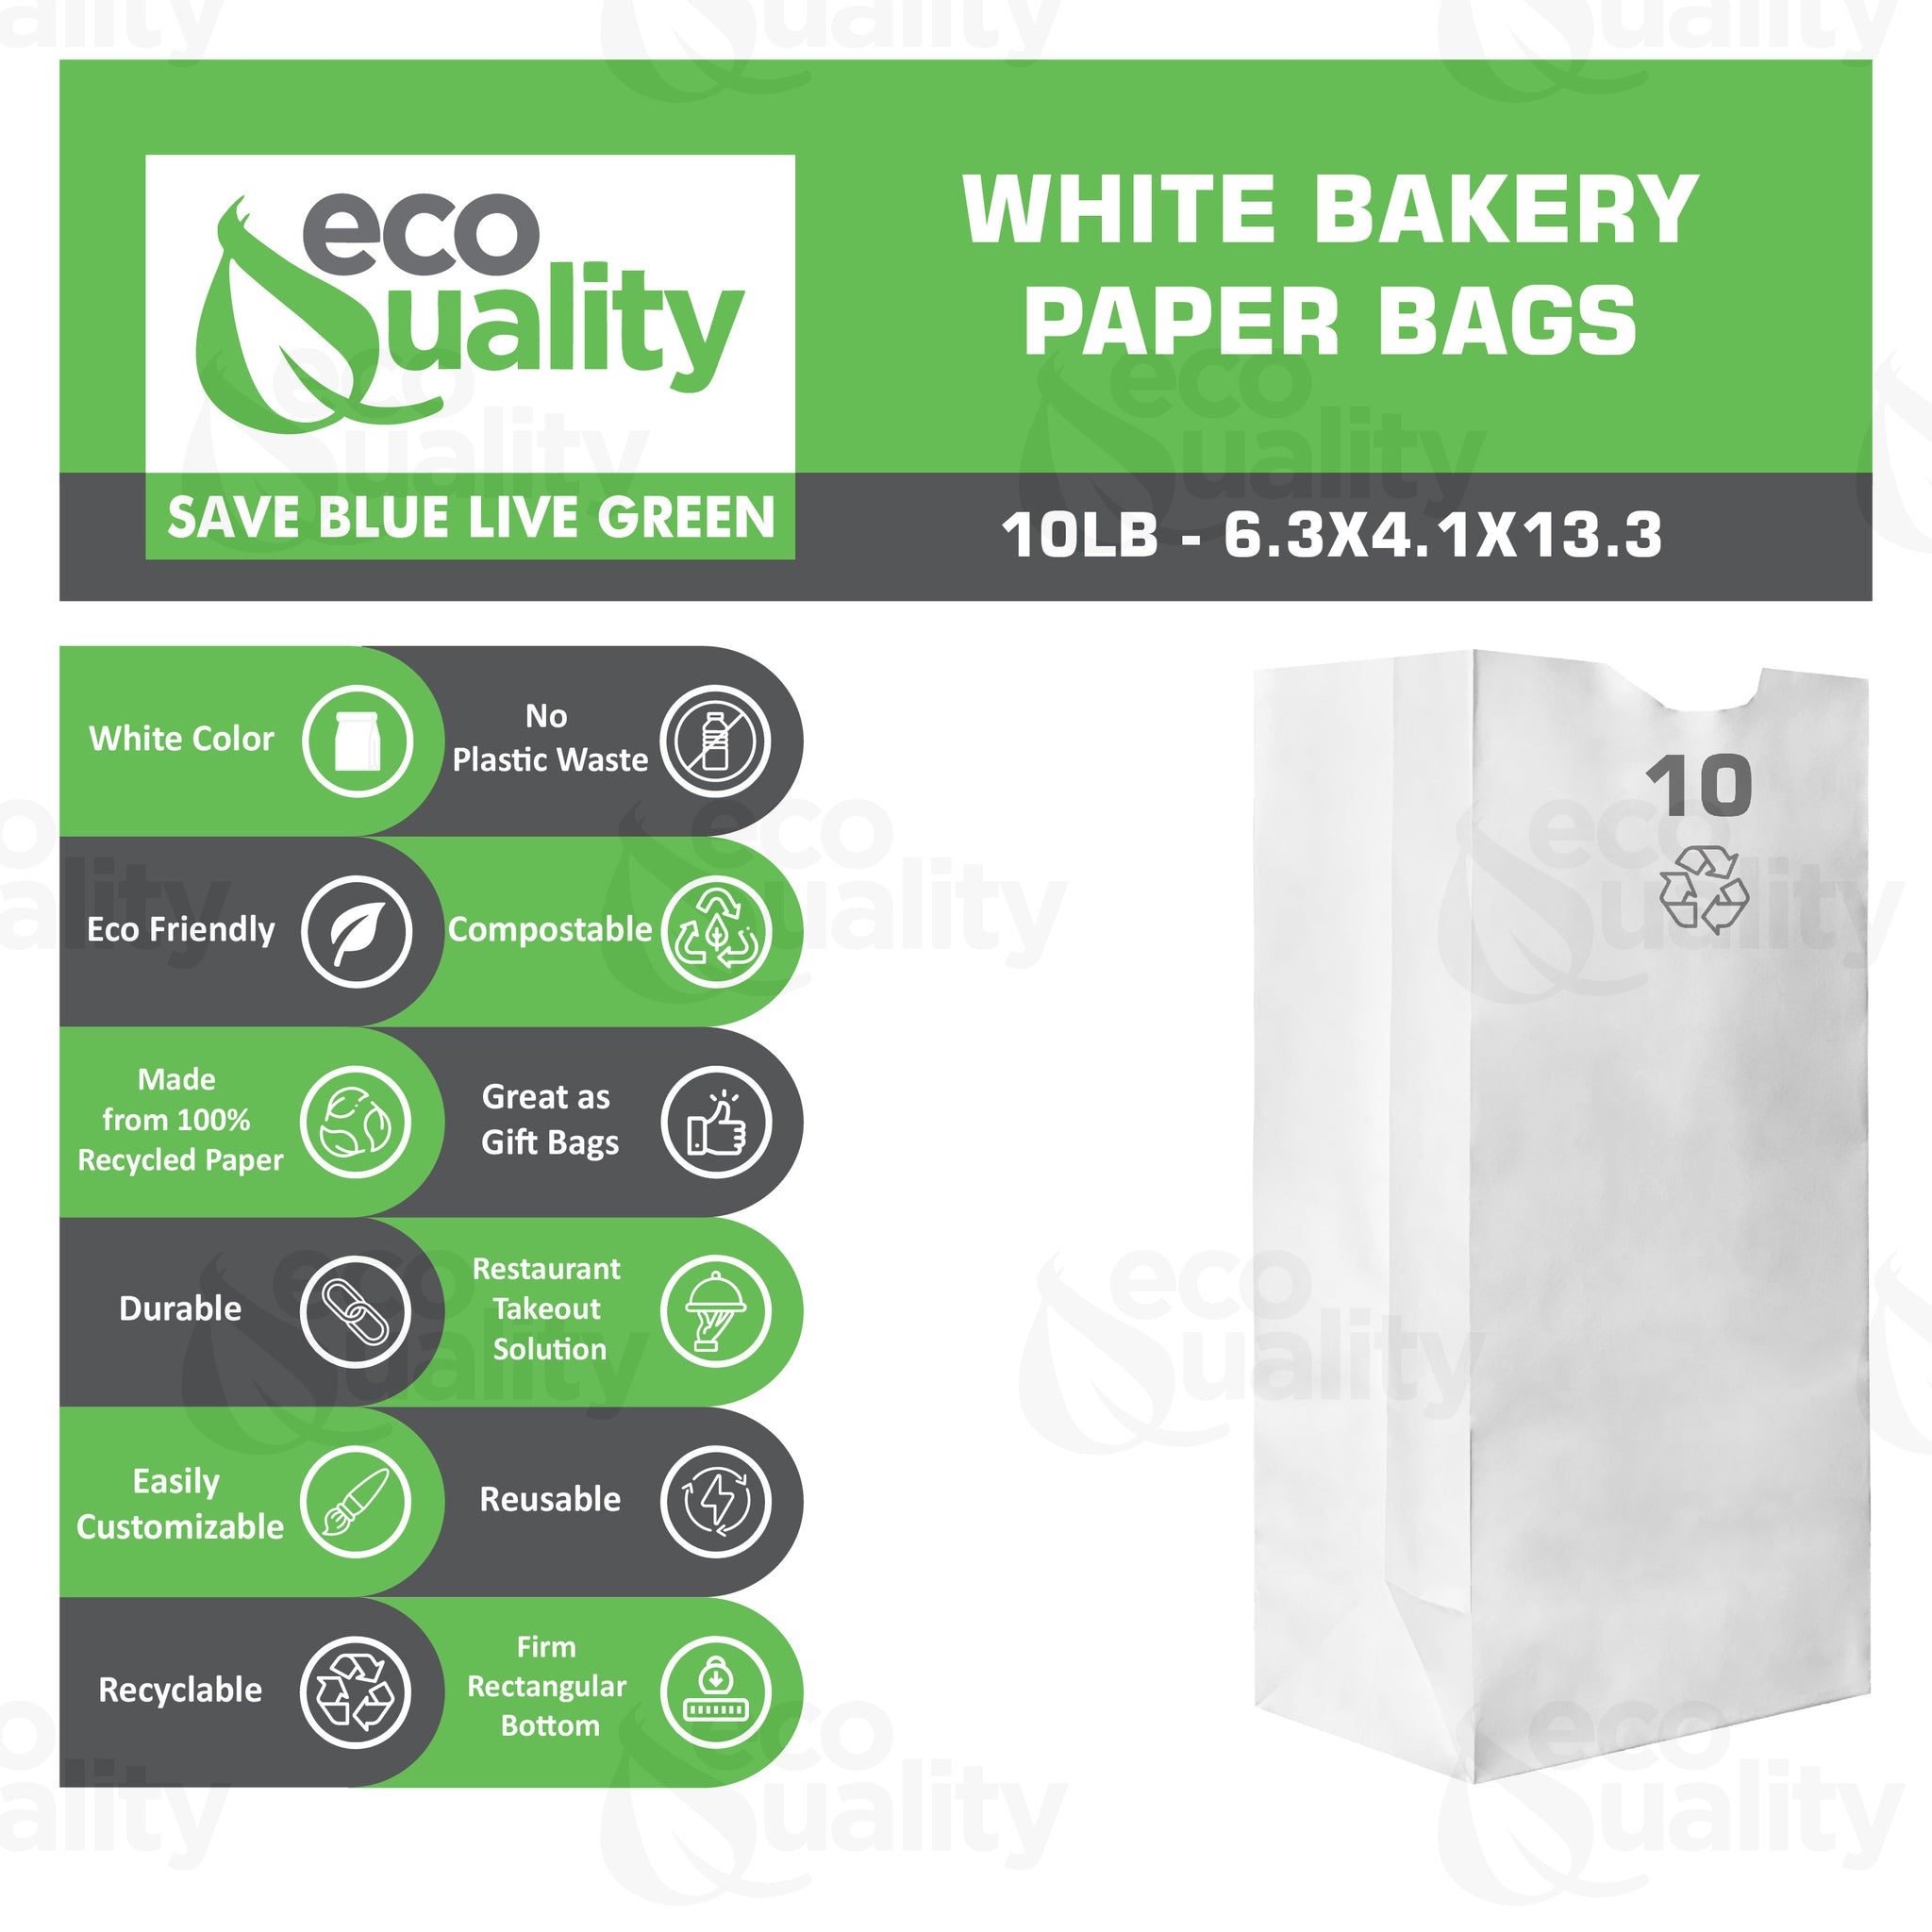 disposable bag White Paper Bags white Paper Shopping Bags foldable paper bag catering bags white kraft paper bag 1 pound candy bag snack bag gift bags DIY Bags arts and craft Sandwich Bag white paper bag party favor bag lunch bag togo bag takeout bag Restaurant supplies paper bakery bags Kraft Paper Bags kraft grocery bags supermarket Household Supplies hero bread tall long paper bag 10 pound